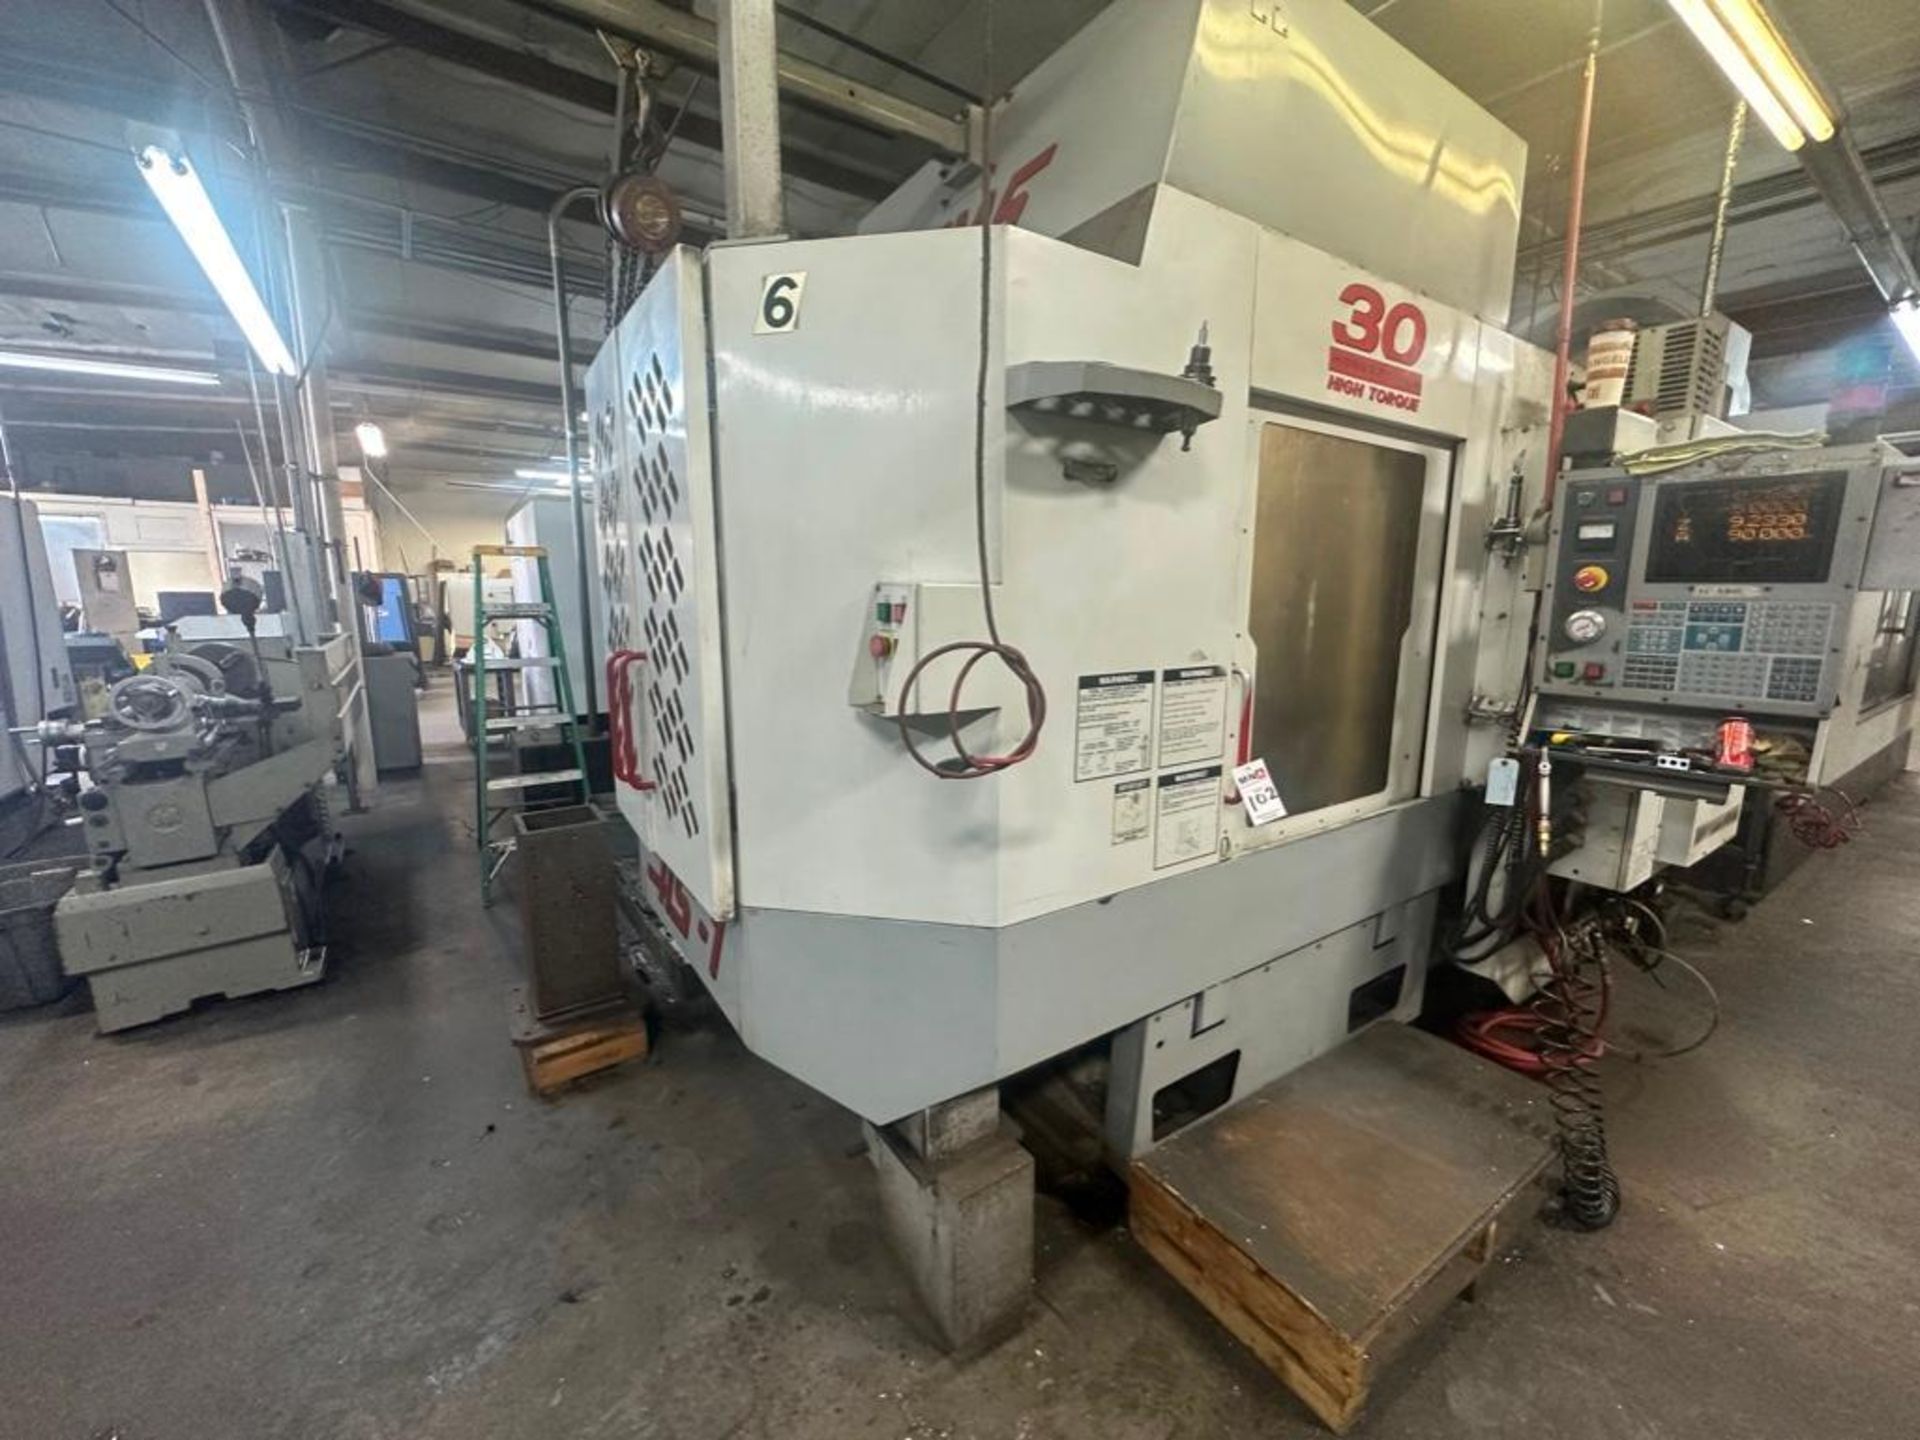 Haas HS1RP 4-Axis Horizontal Machining Center, 24" x 20" x 22" Trvls., New 2001 - Image 2 of 10